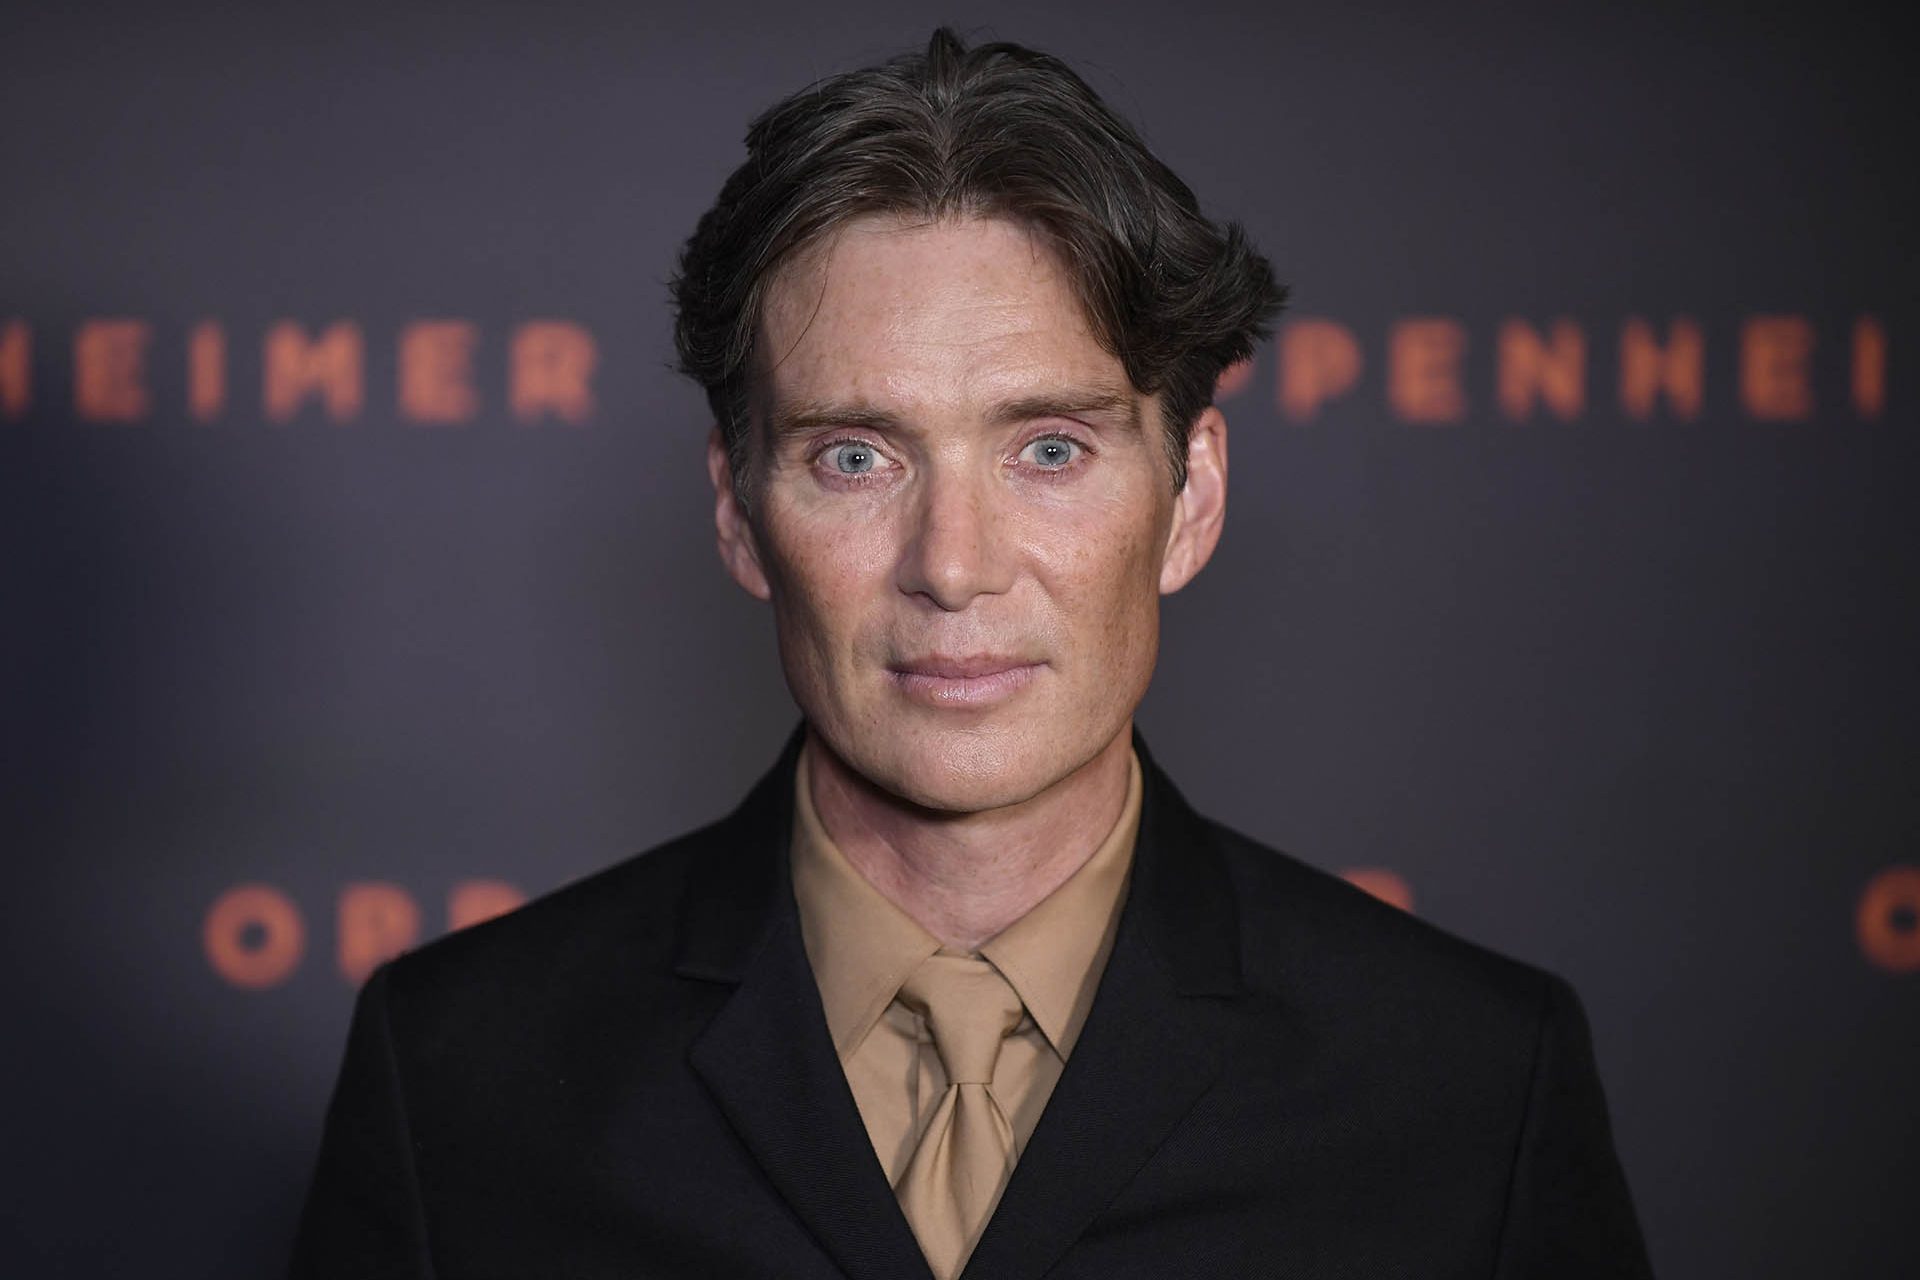 Where did you see Cillian Murphy before 'Oppenheimer'?